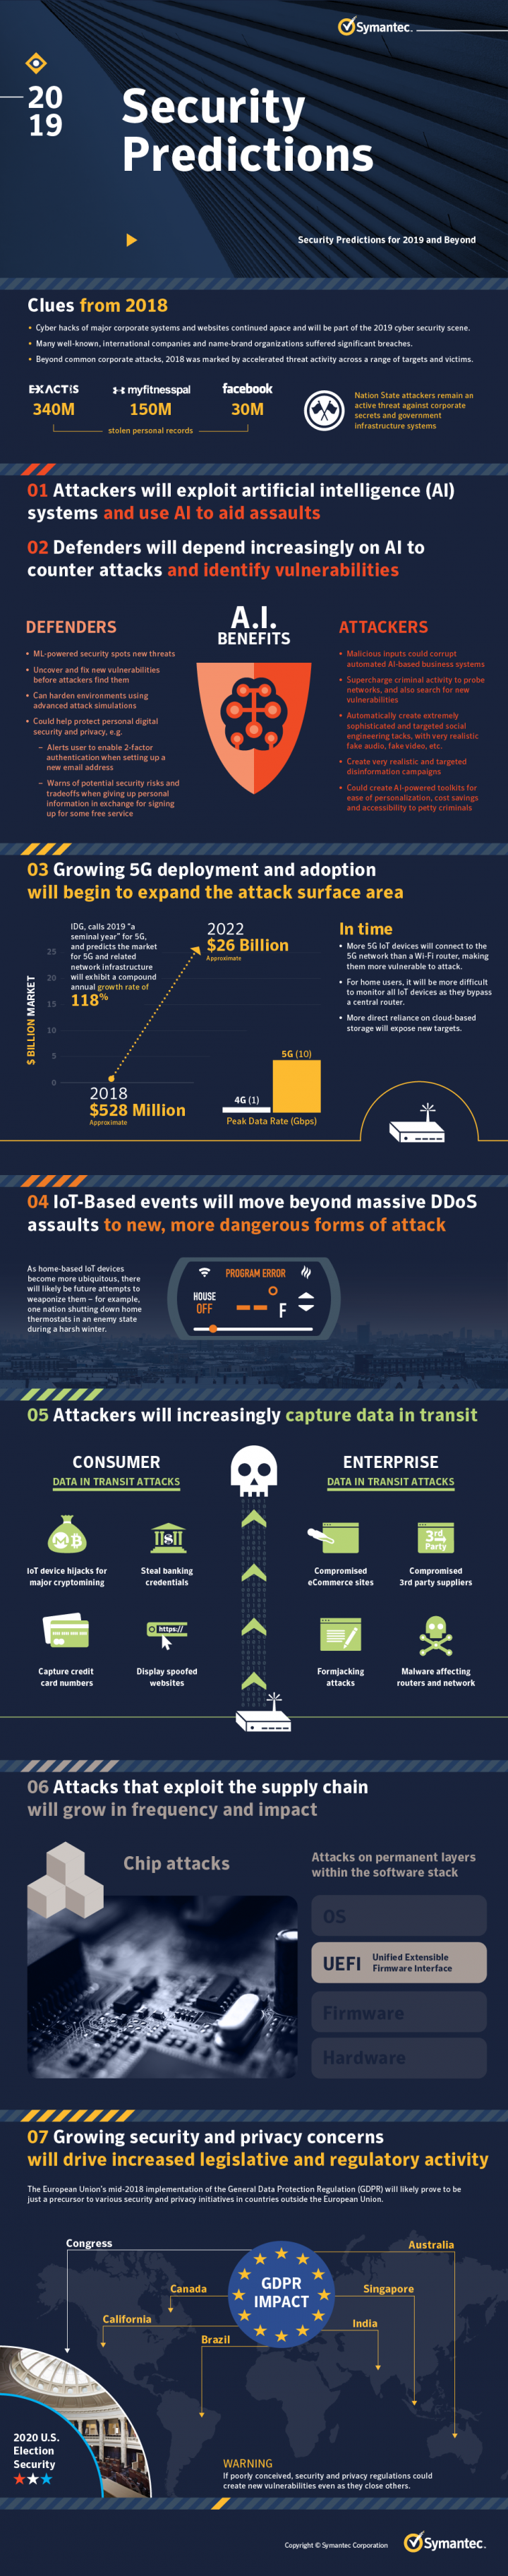 Security Predictions 2019 Infographic